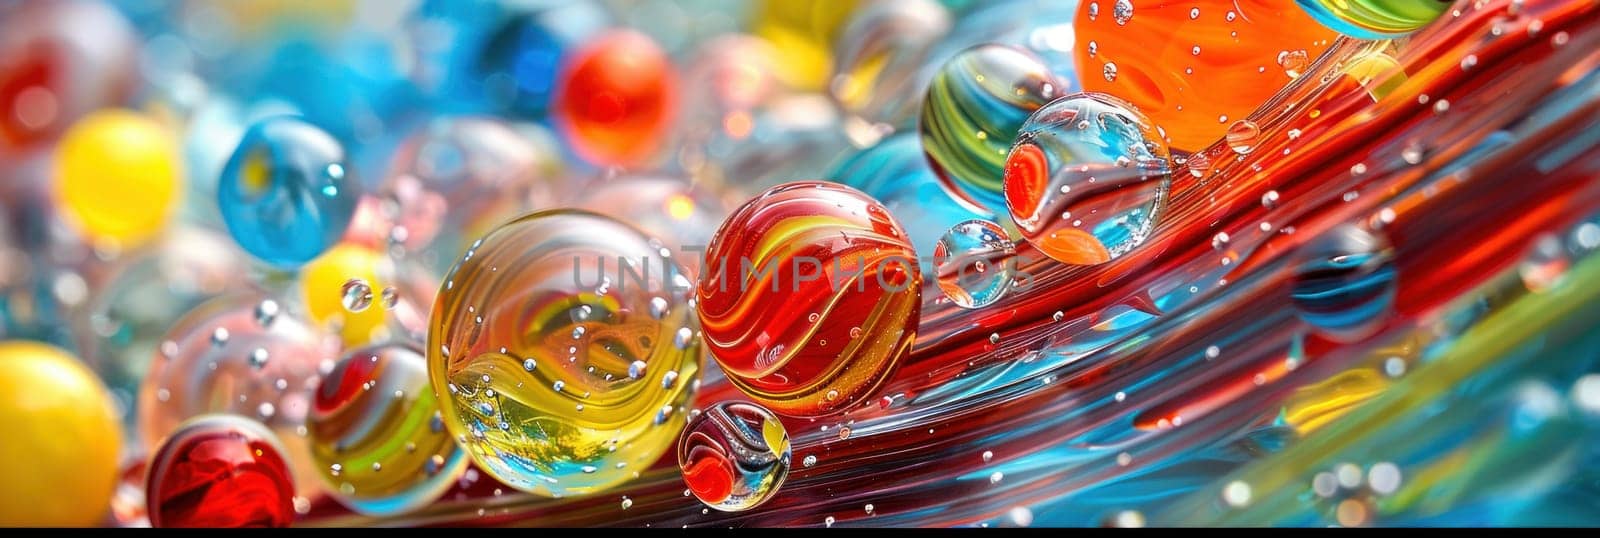 A colorful collection of marbles with a rainbow of colors.